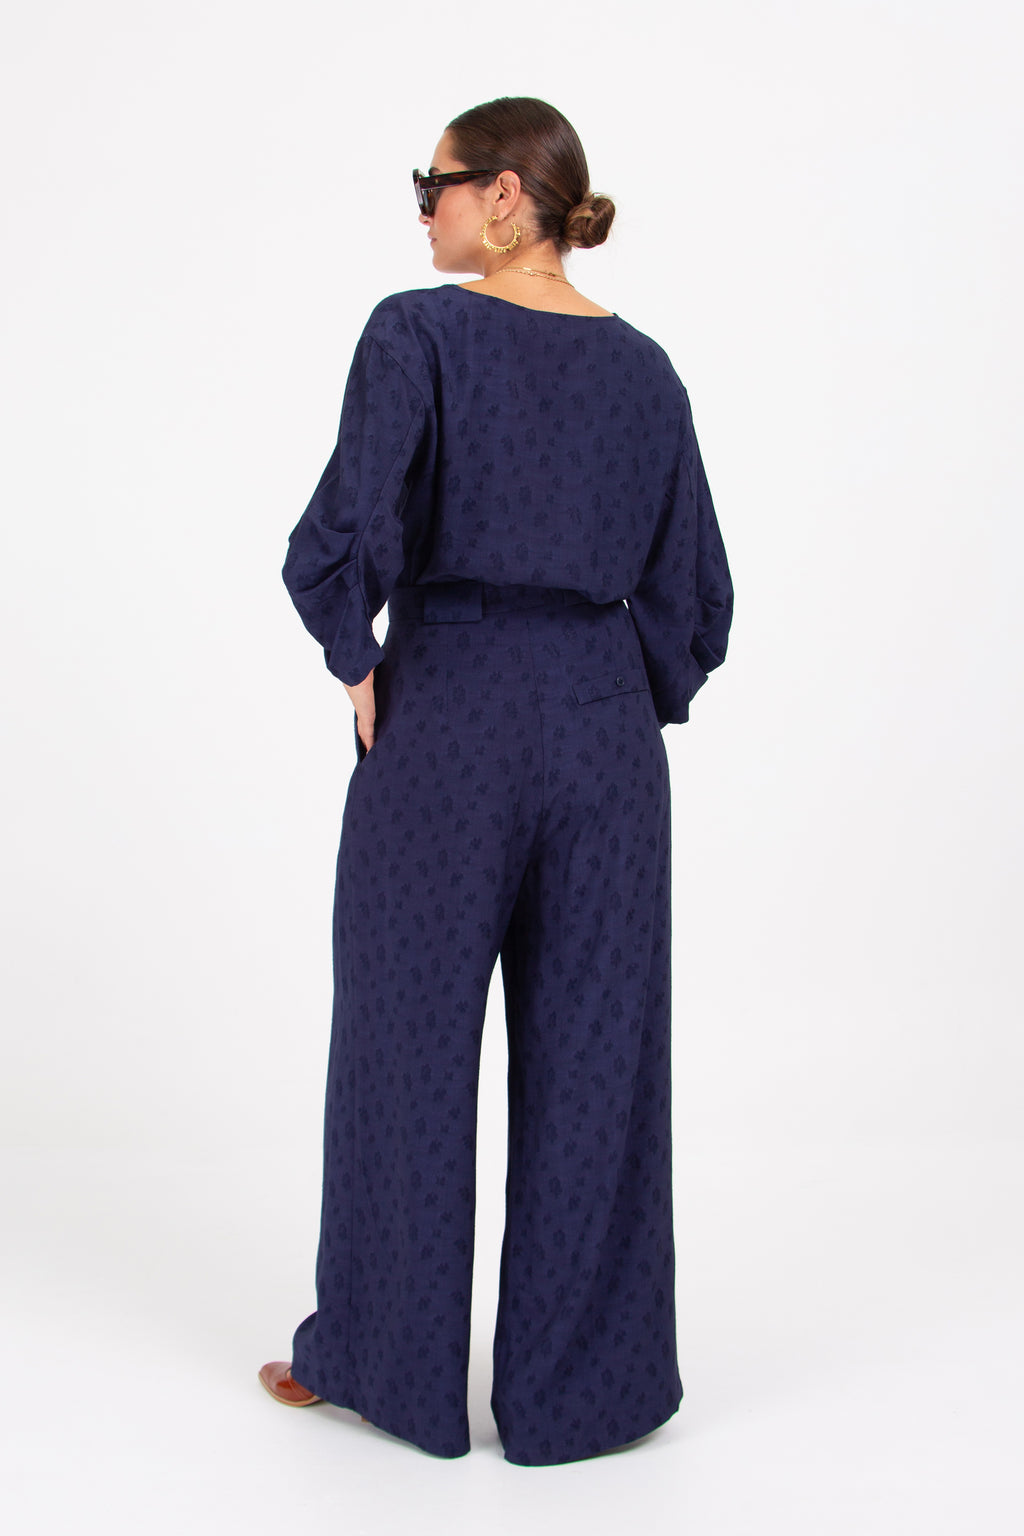 Donny trousers in blue woven berries